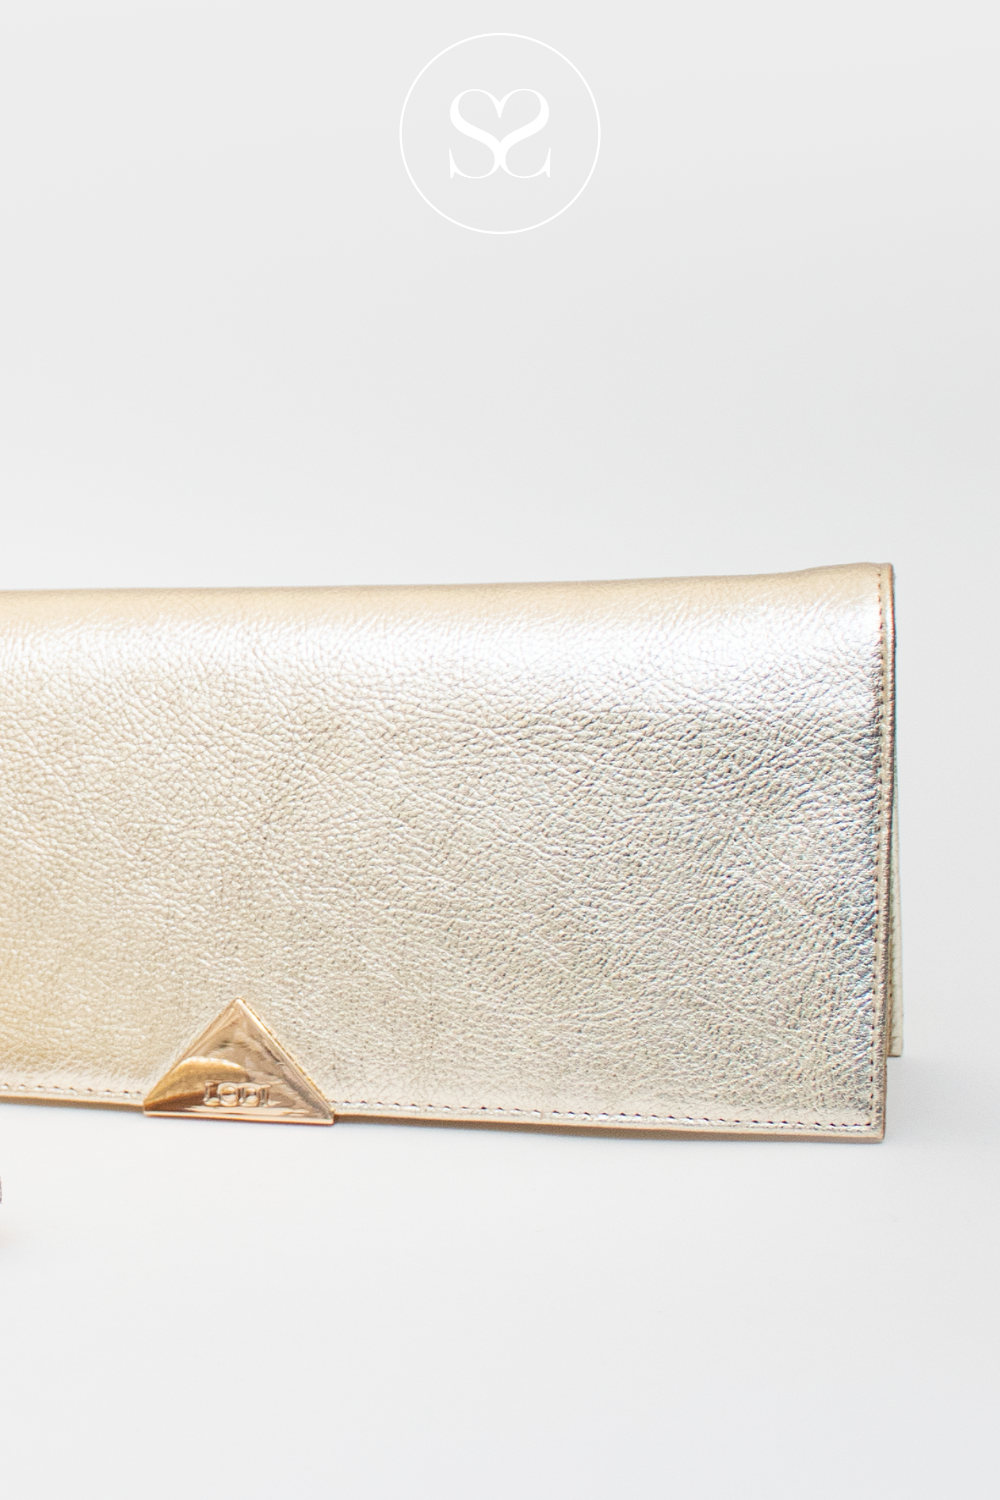 PEBBLED GOLD LEATHER ENVELOPE CLUTCH BAG FROM LODI